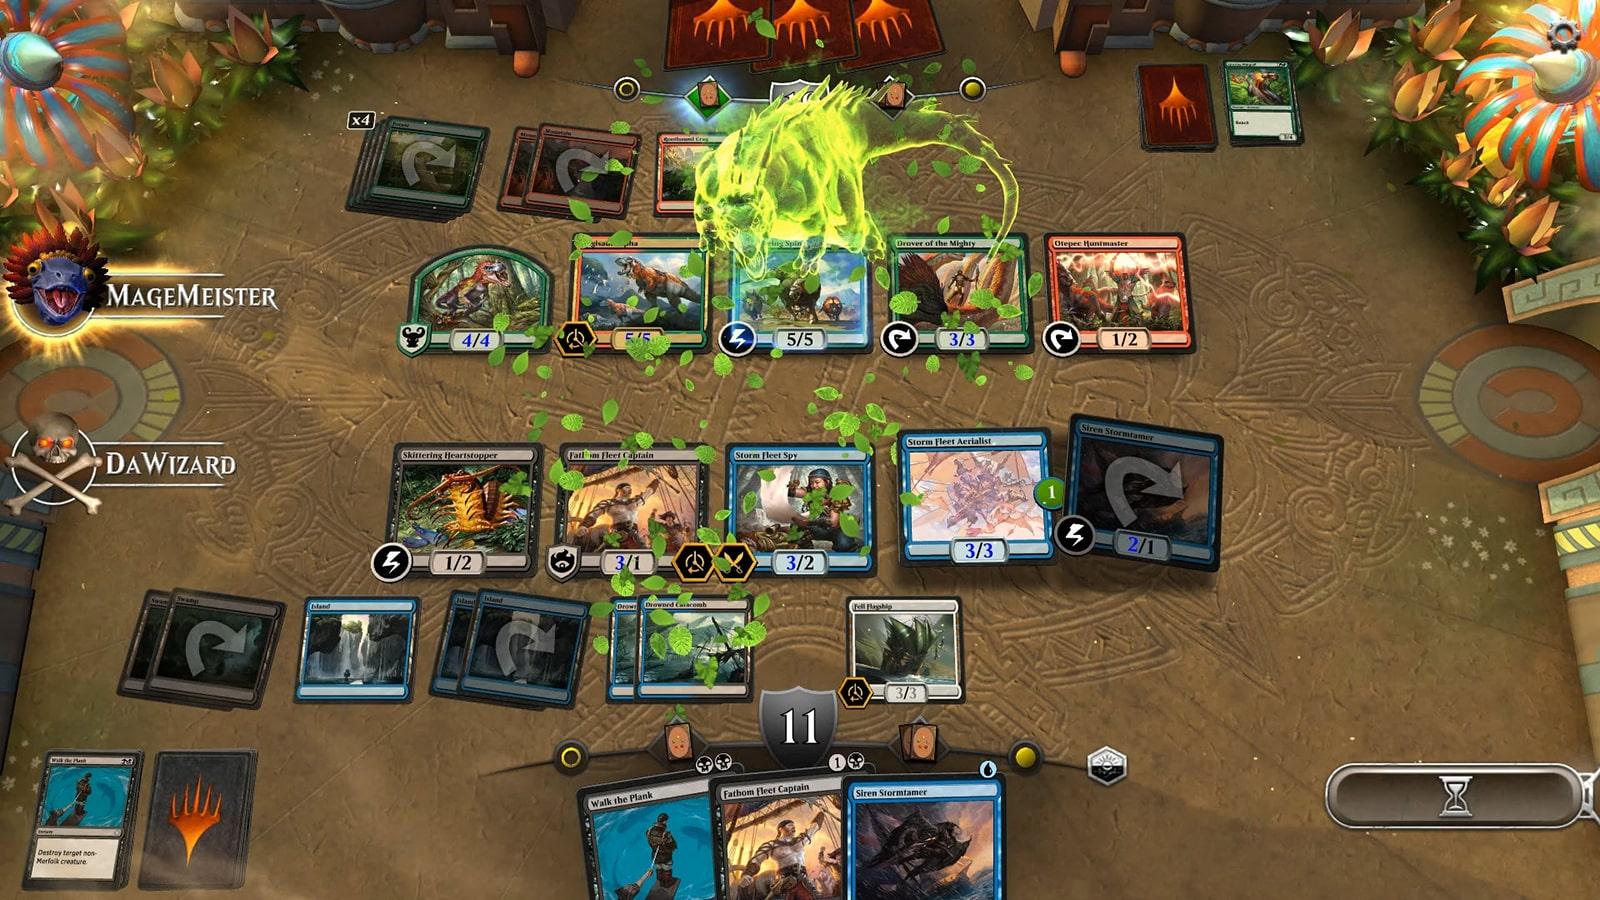 An image of gameplay in Magic The Gathering arena